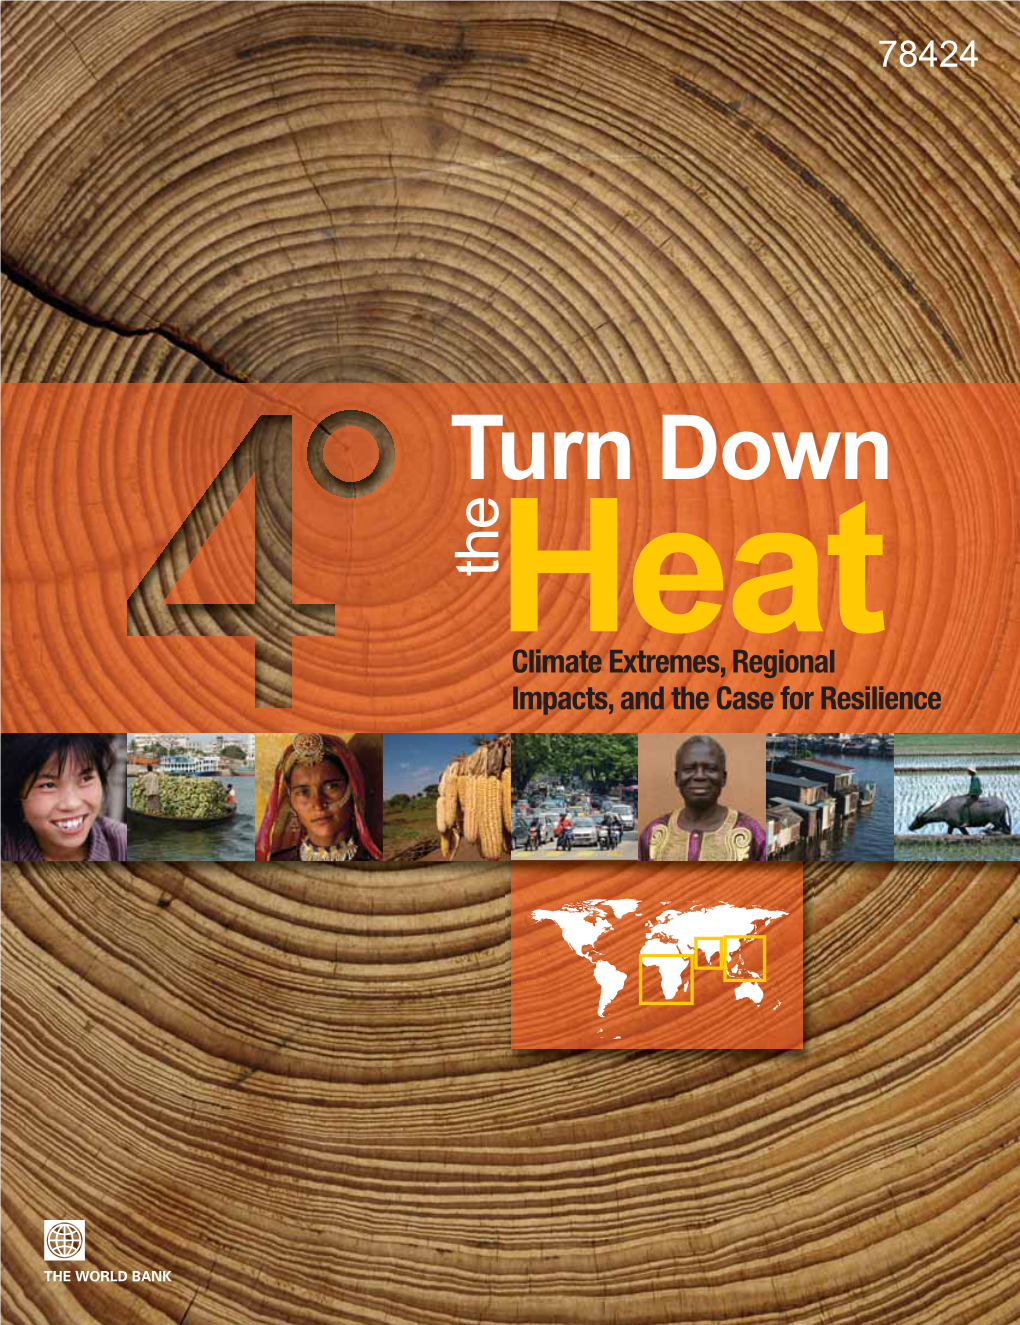 Turn Down Heatthe Climate Extremes, Regional Impacts, and the Case for Resilience Turn Down Heatthe Climate Extremes, Regional Impacts, and the Case for Resilience